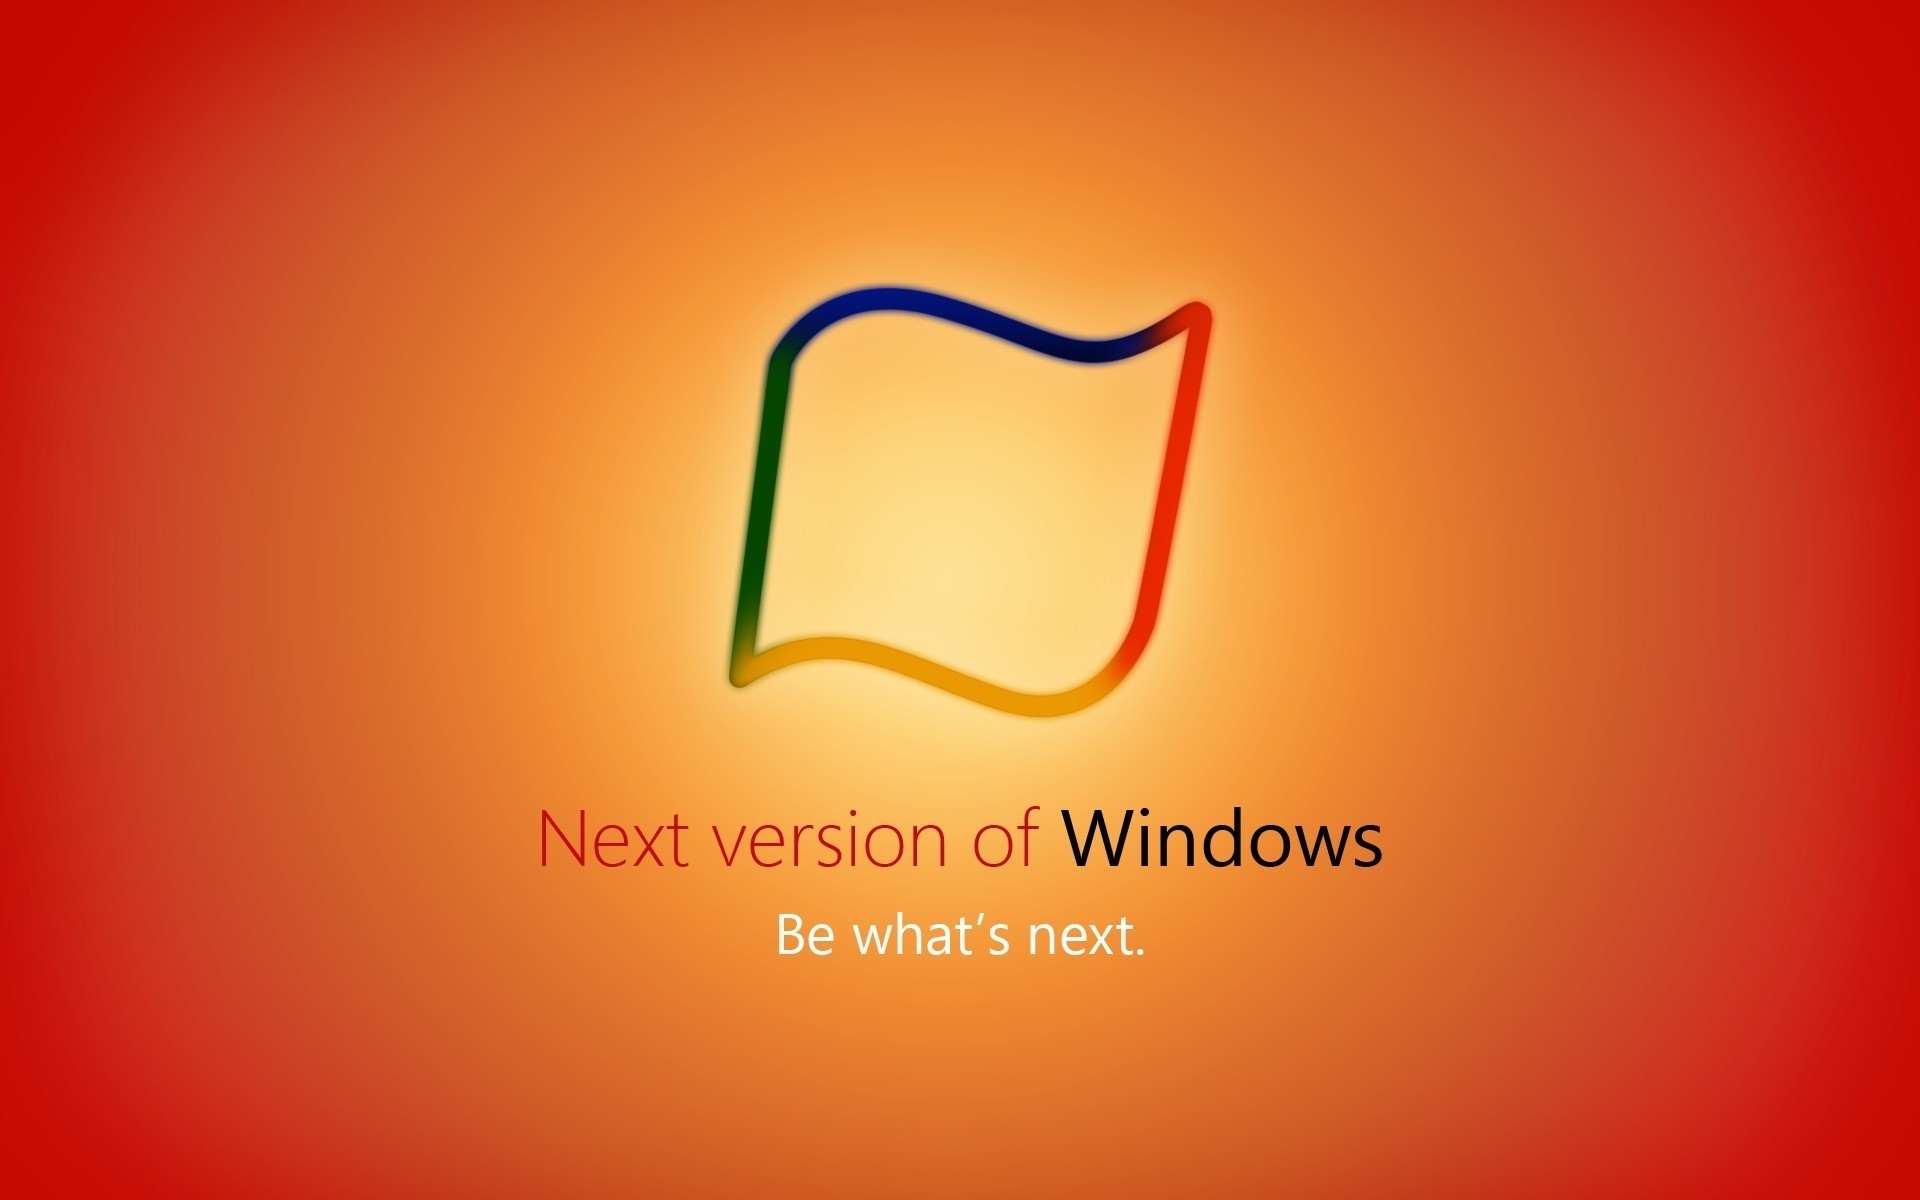 Next Version of Windows for 1920 x 1200 widescreen resolution